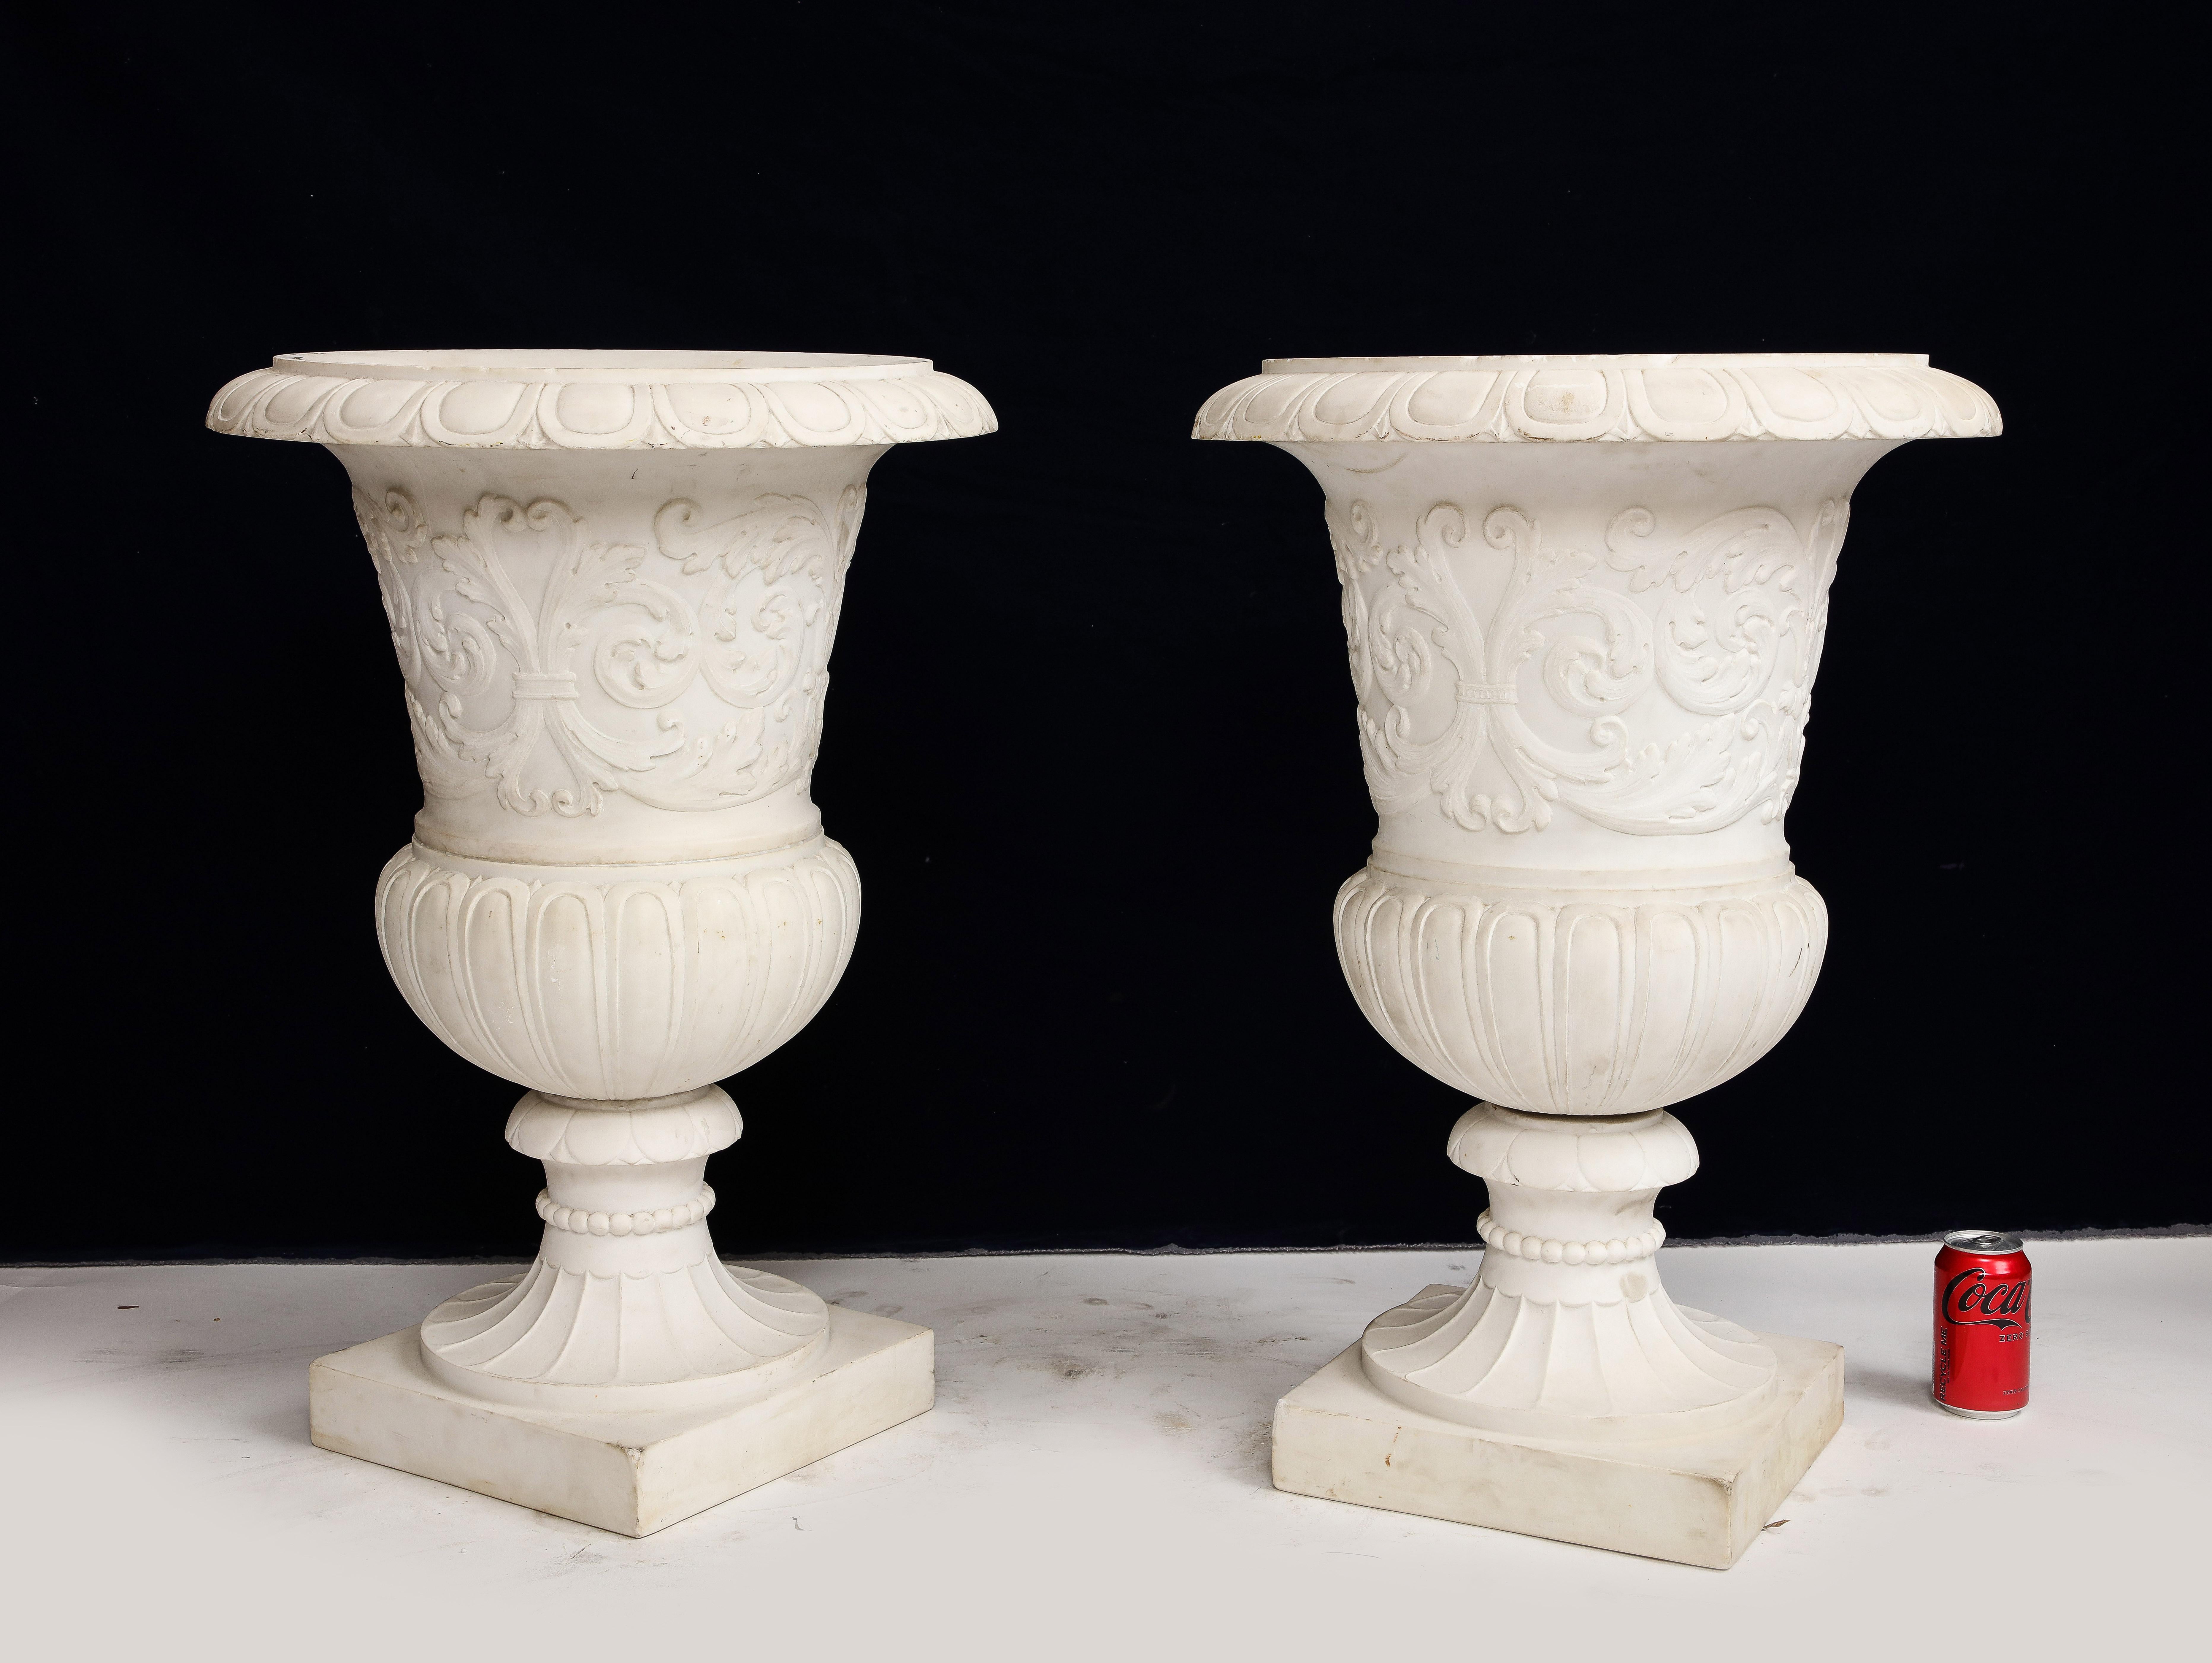 Pair of Italian Carrara Marble Medici Vases w/ Neoclassical Motifs in Relief For Sale 2